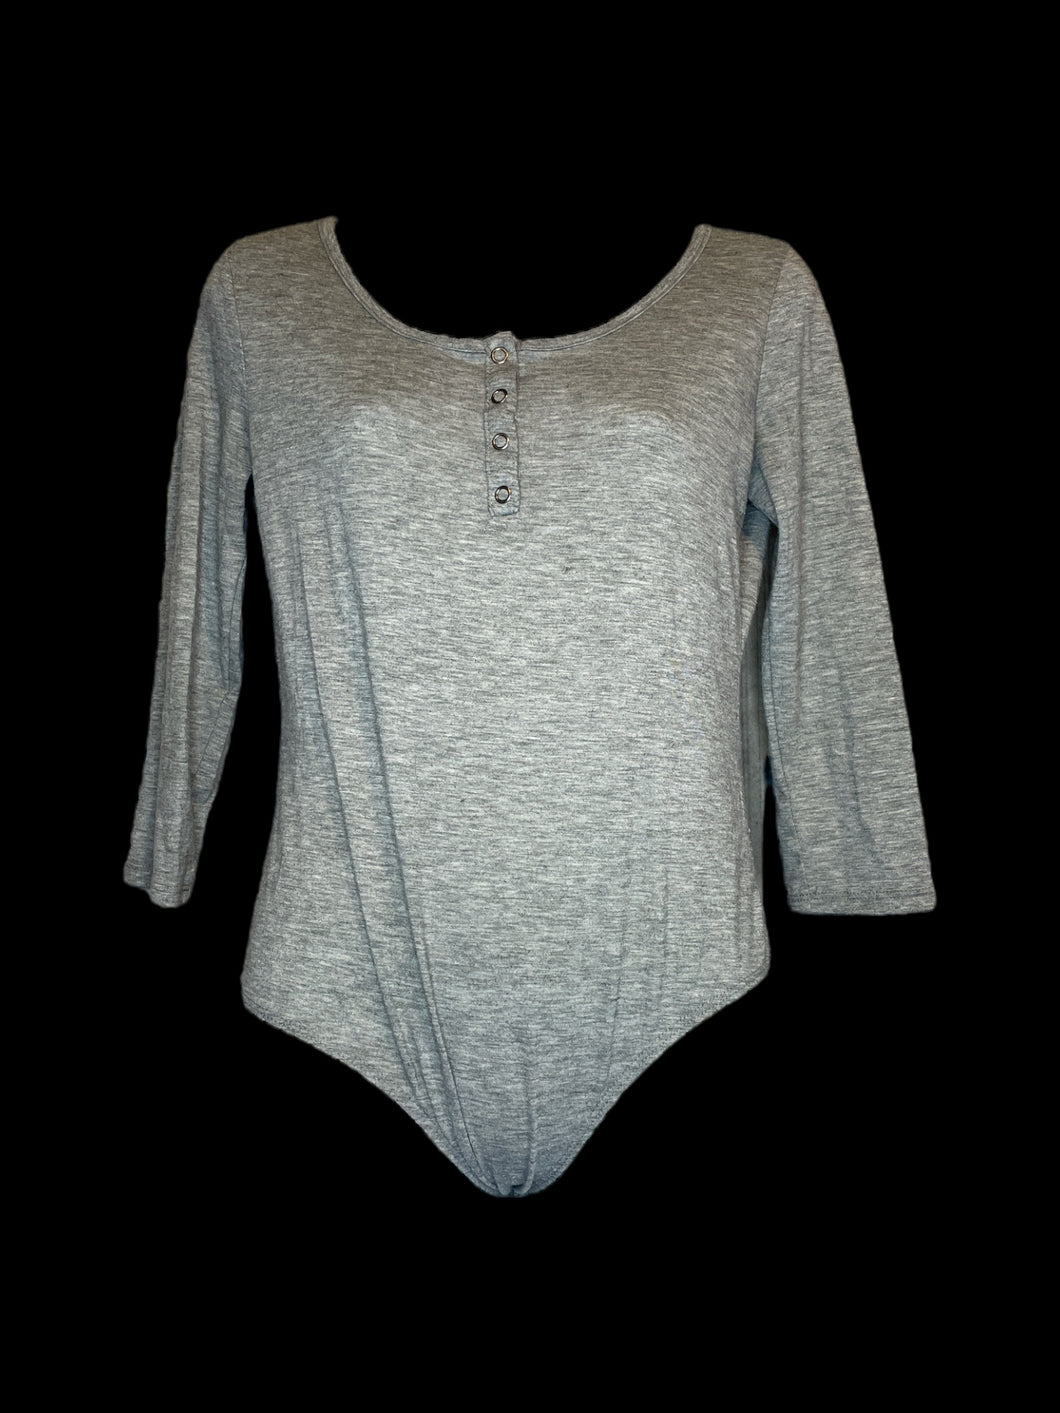 M Heathered grey long sleeve bodysuit w/ snap button bust & closure